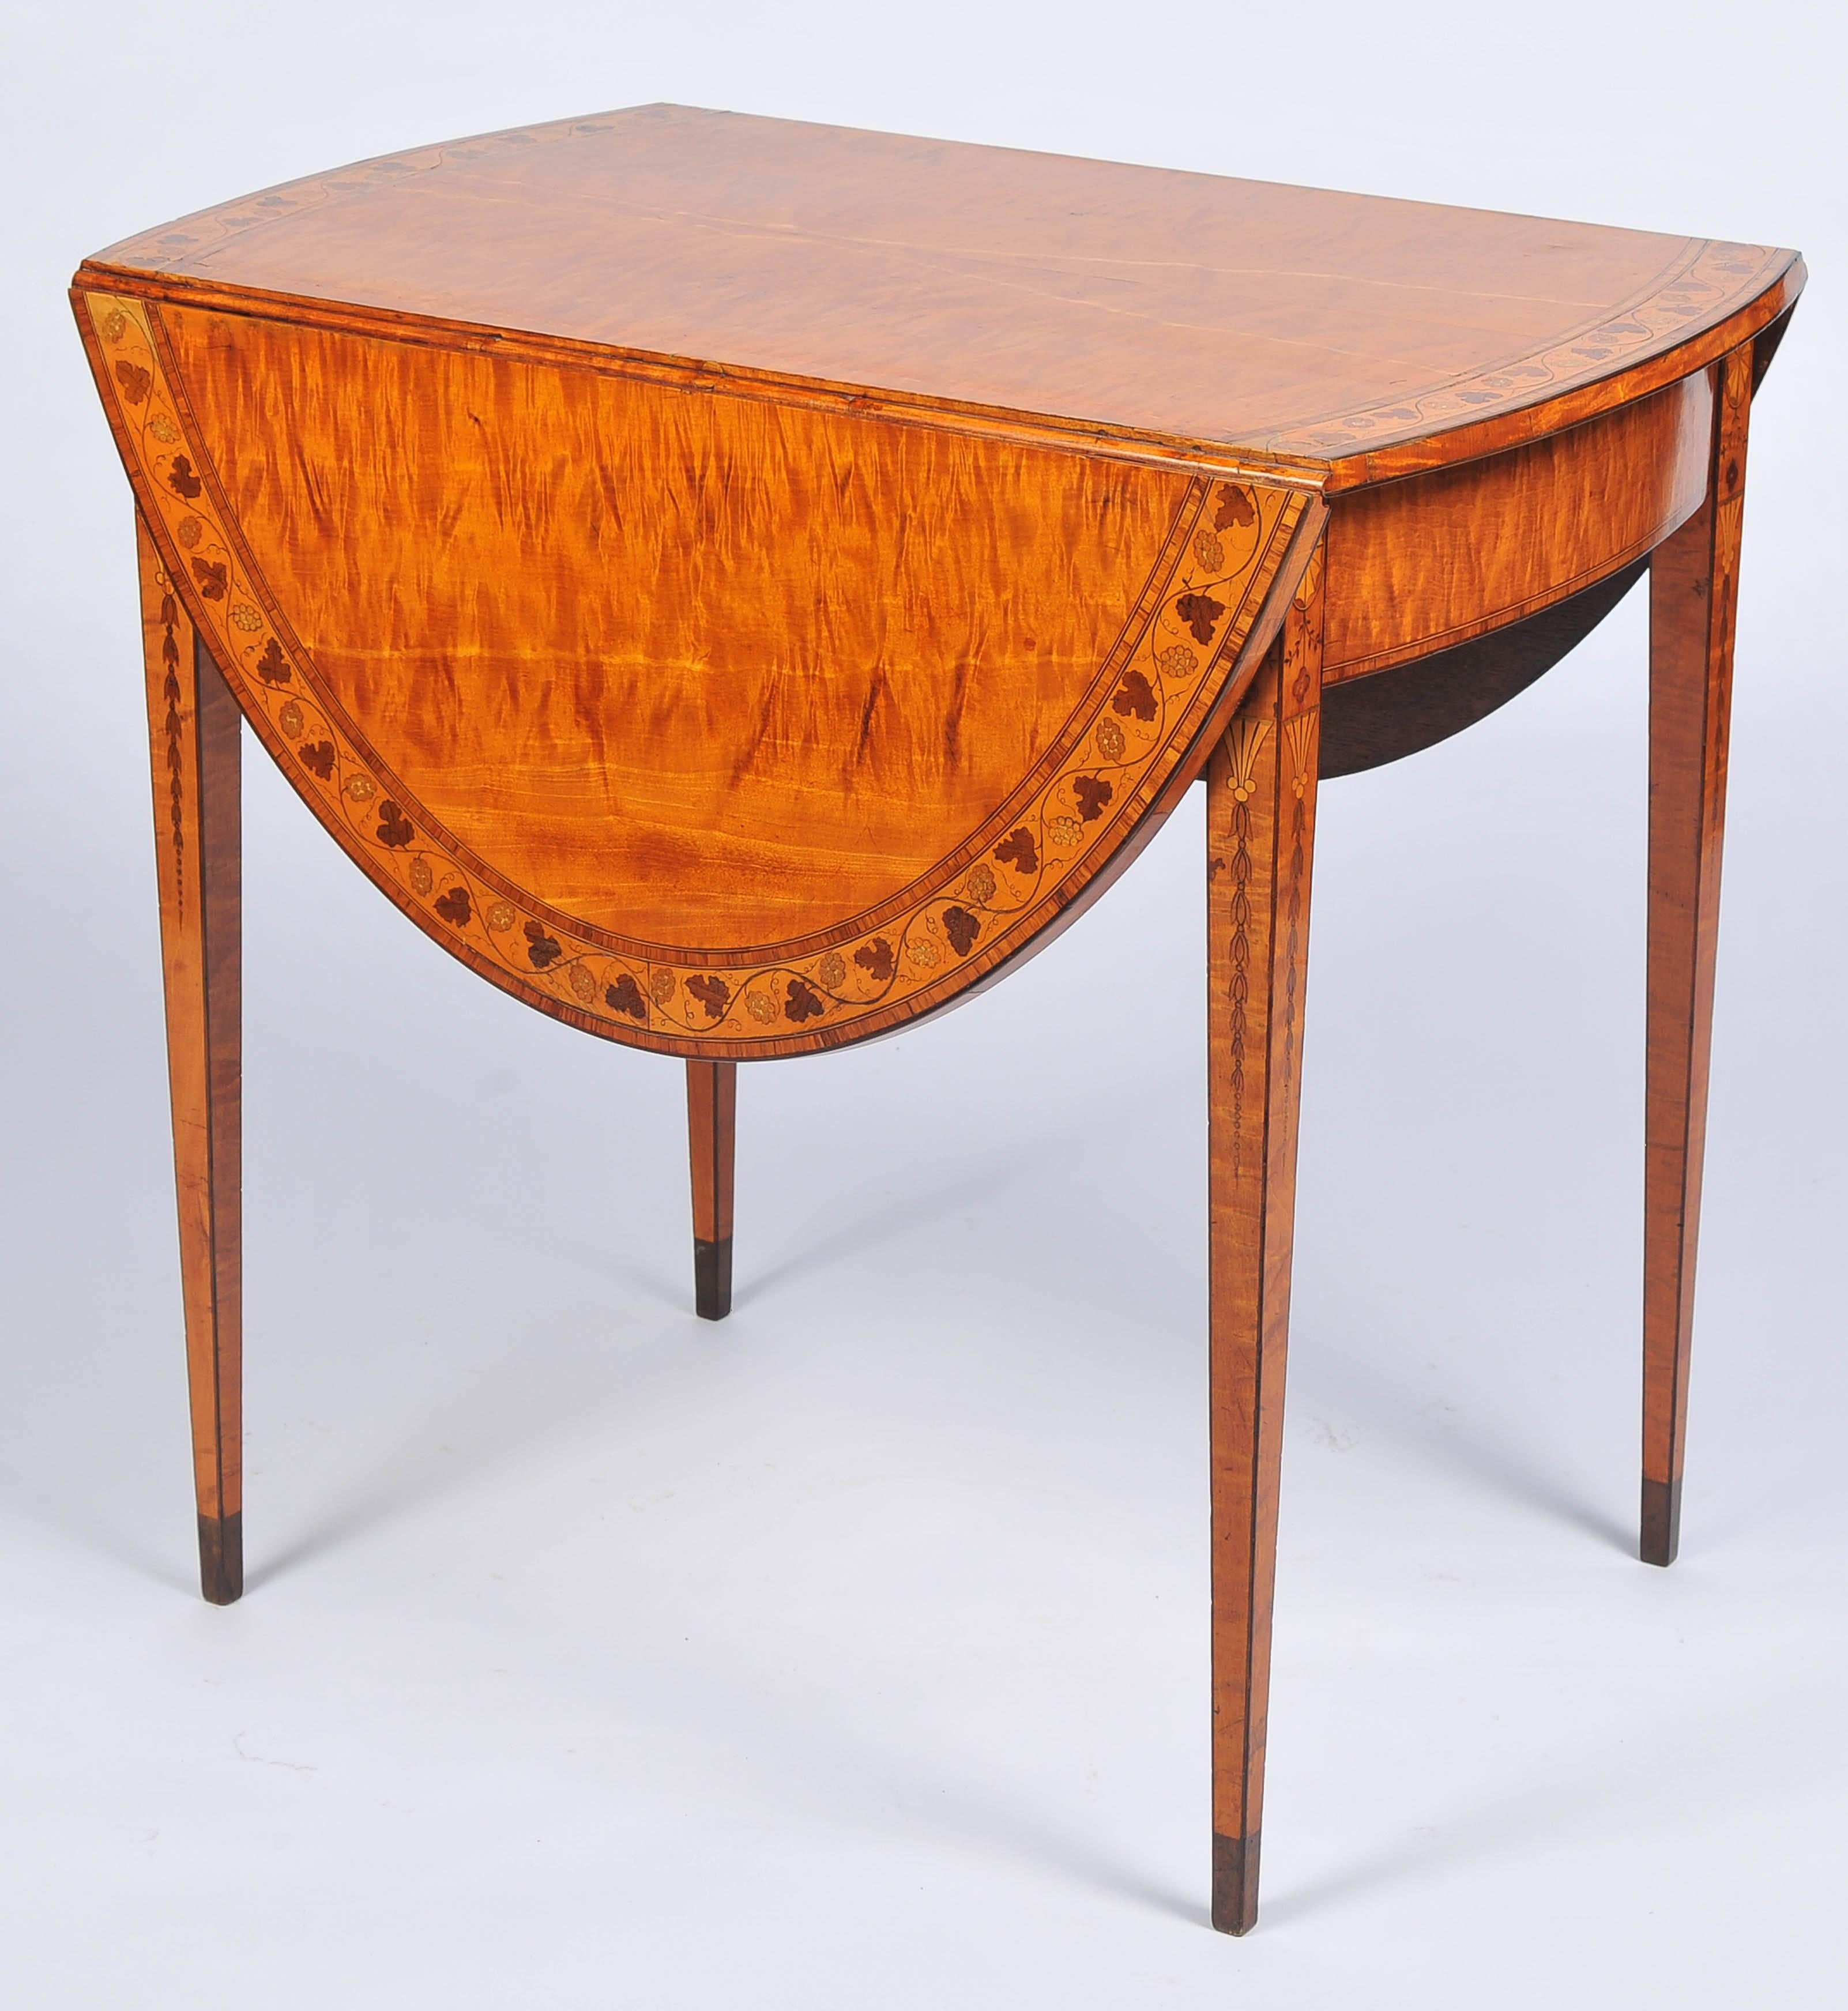 A wonderful quality 18th century Sheraton period satinwood pembroke table, having marquetry inlaid cross-banding with vine leaves and grapes, a single bow fronted frieze drawer, raised on square tapering legs with inlaid shells and leaves that